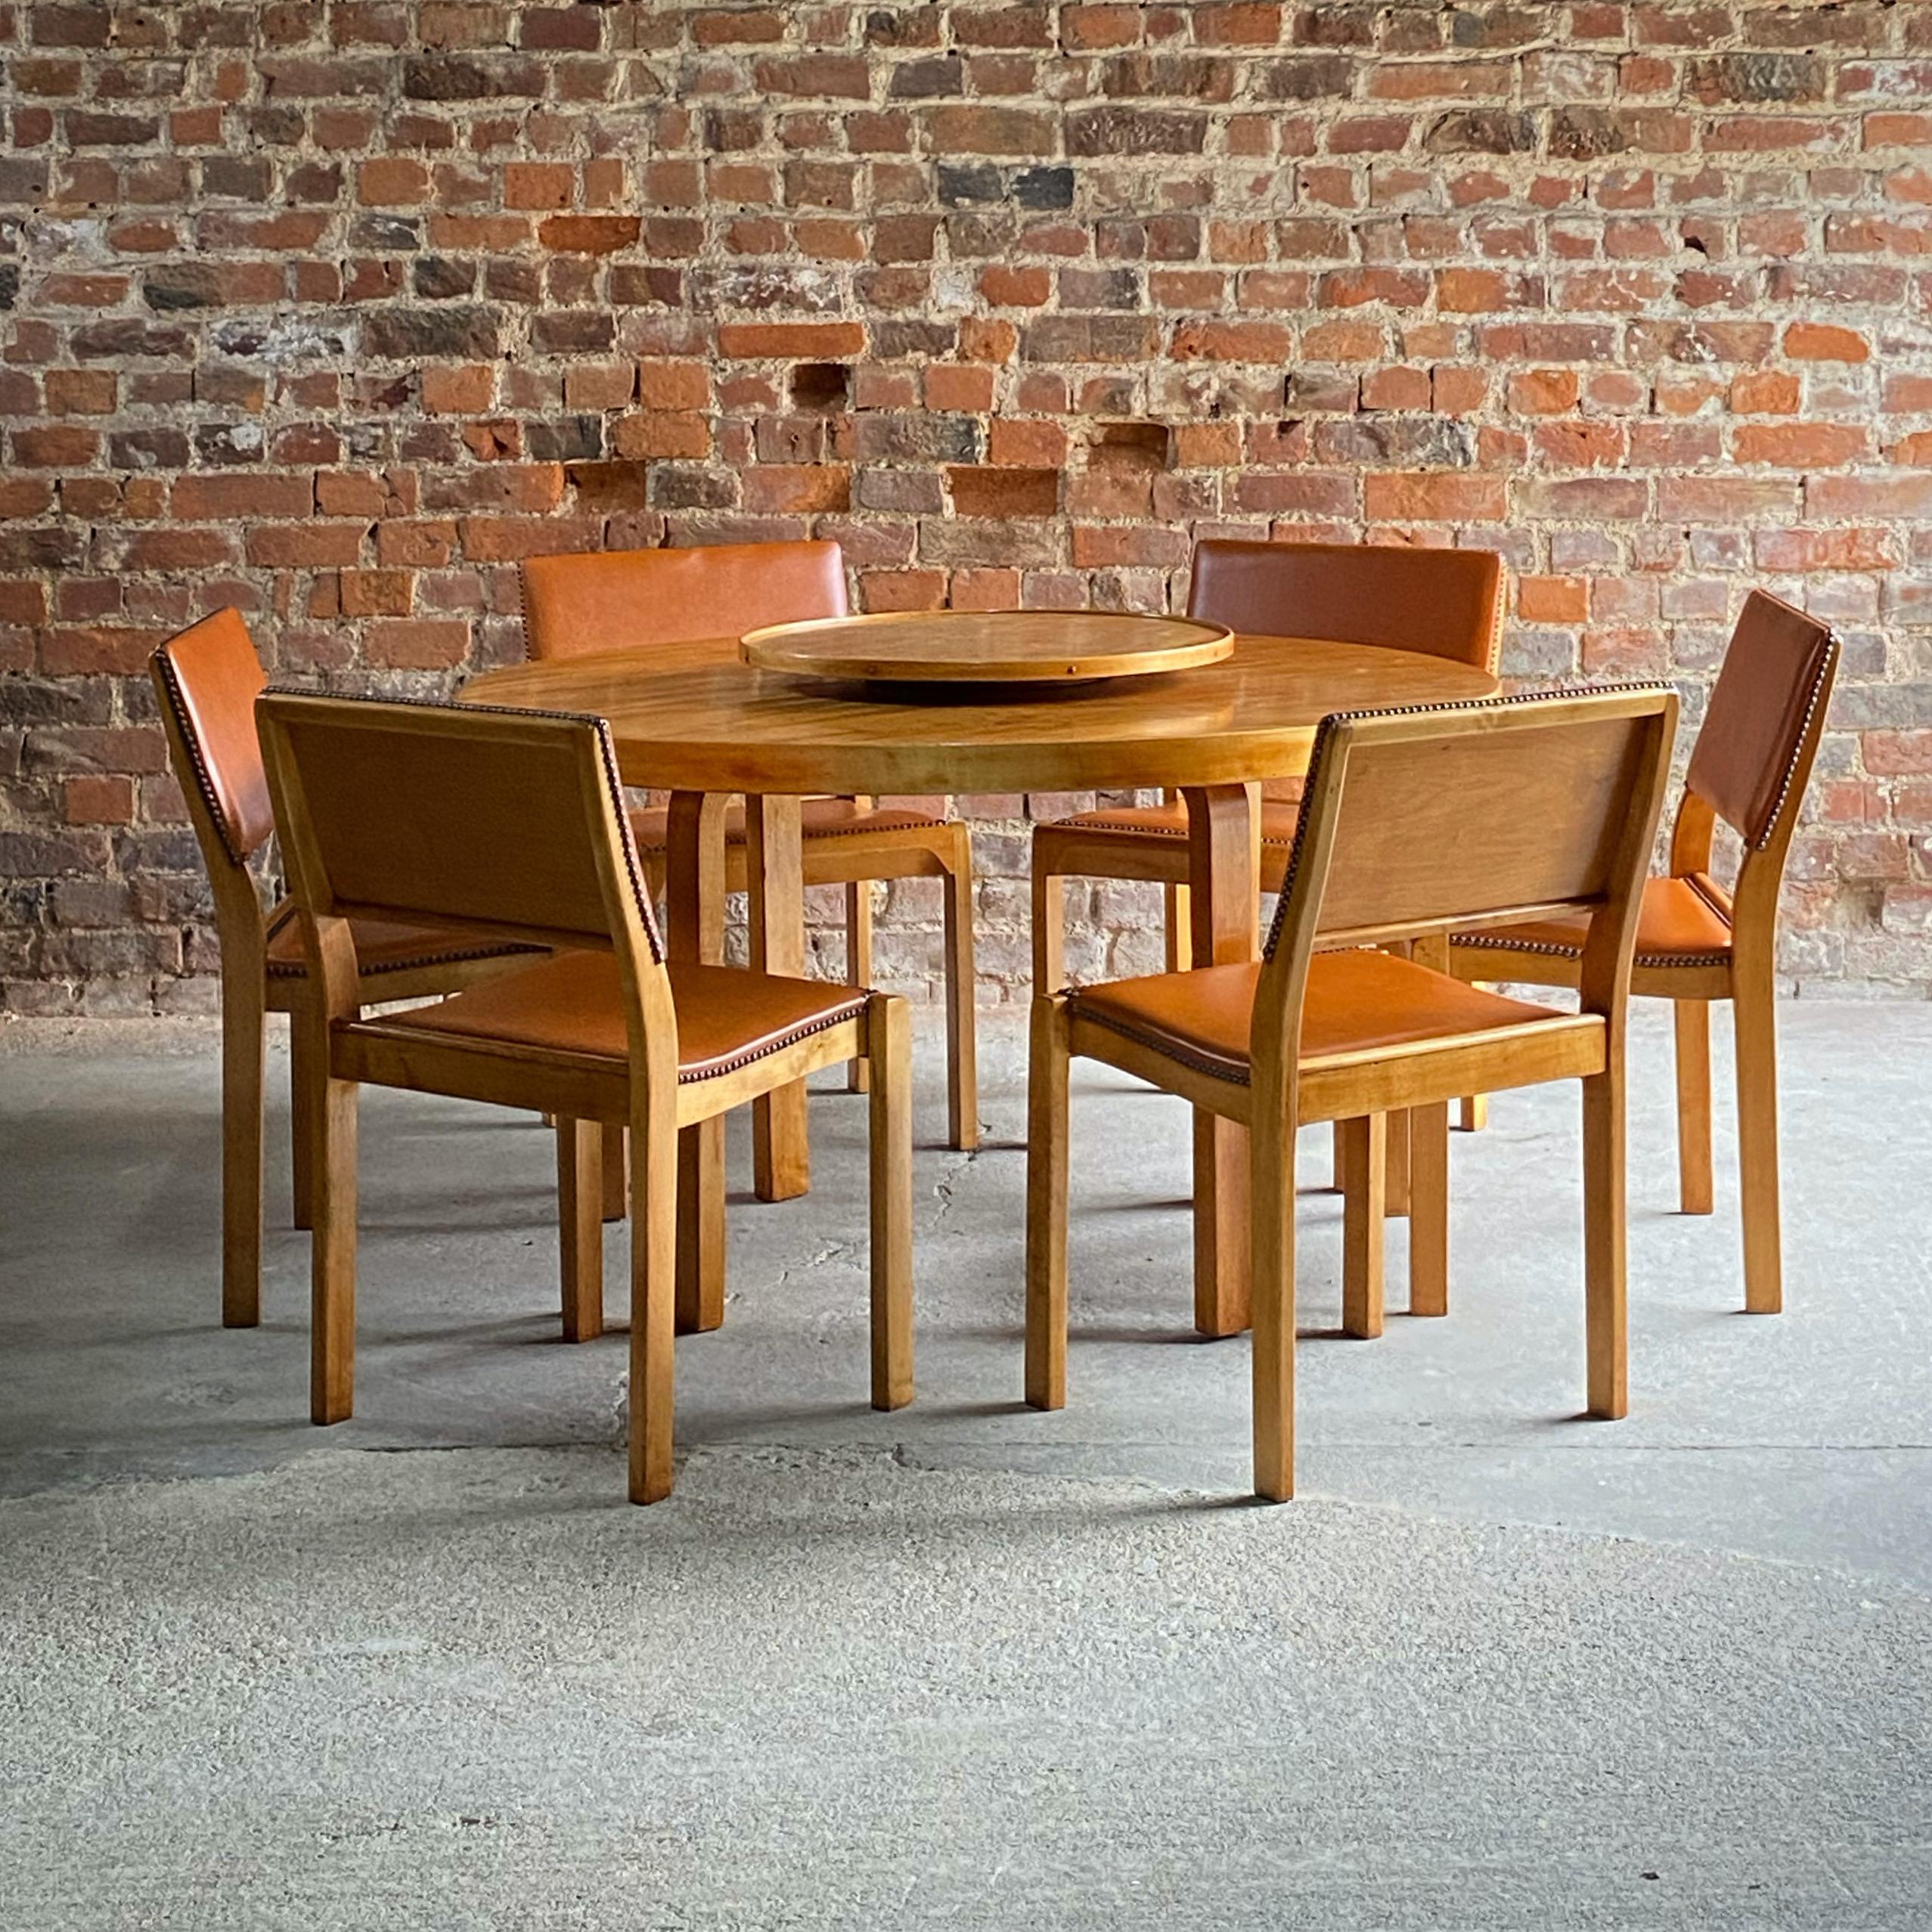 Alvar Aalto Model 91 dining table & six chairs by Finmar Circa 1940.

‘Best in Class' Alvar Aalto Model 91 dining table & Six Model 611 Dining Chairs by Finmar Ltd Finland circa 1940, the beautiful circular Model 91 dining table made from the